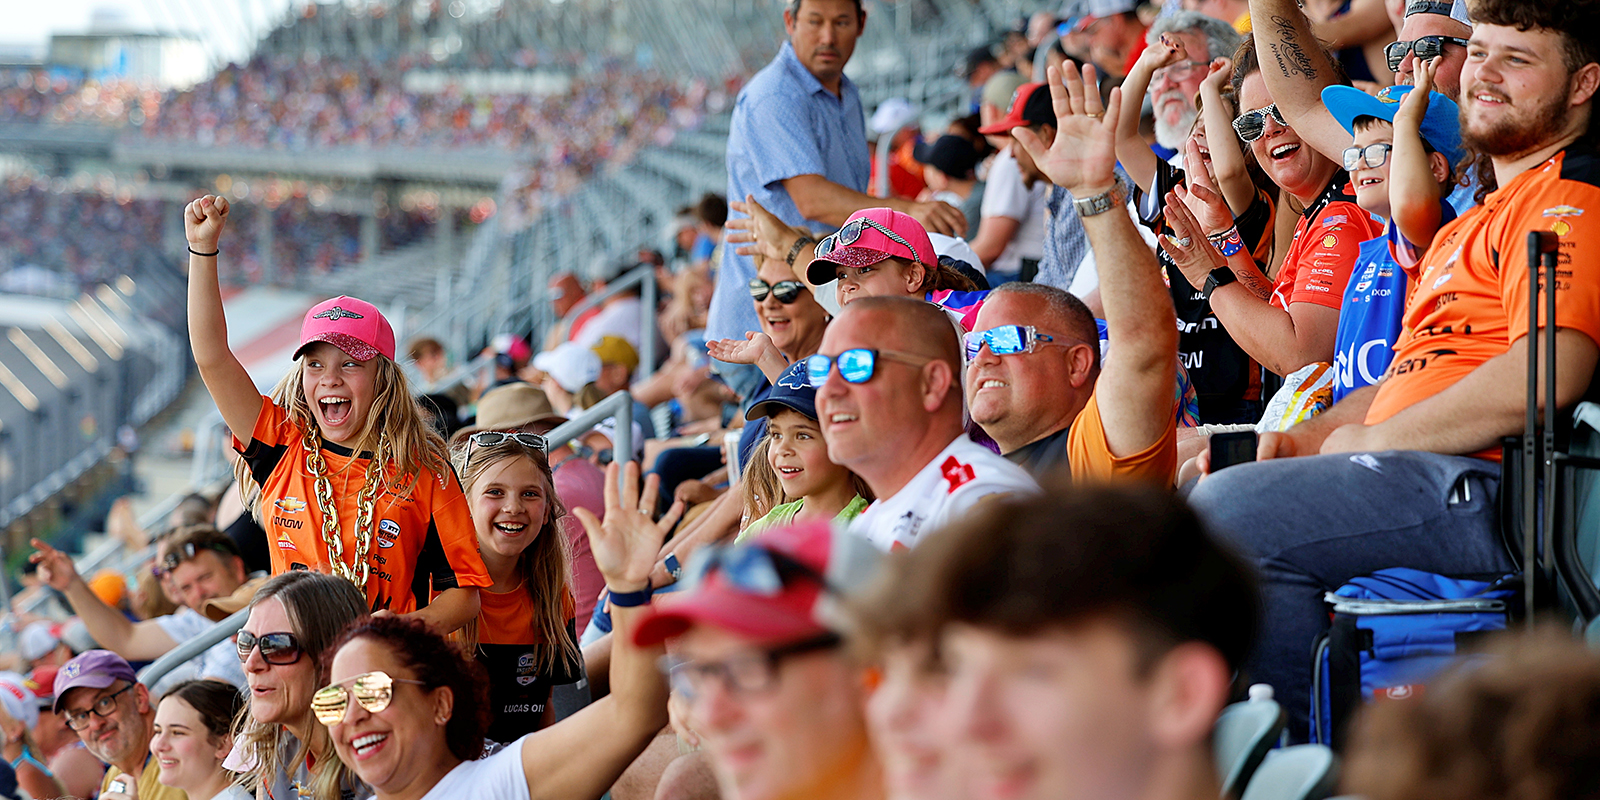 Indianapolis Motor Speedway fans